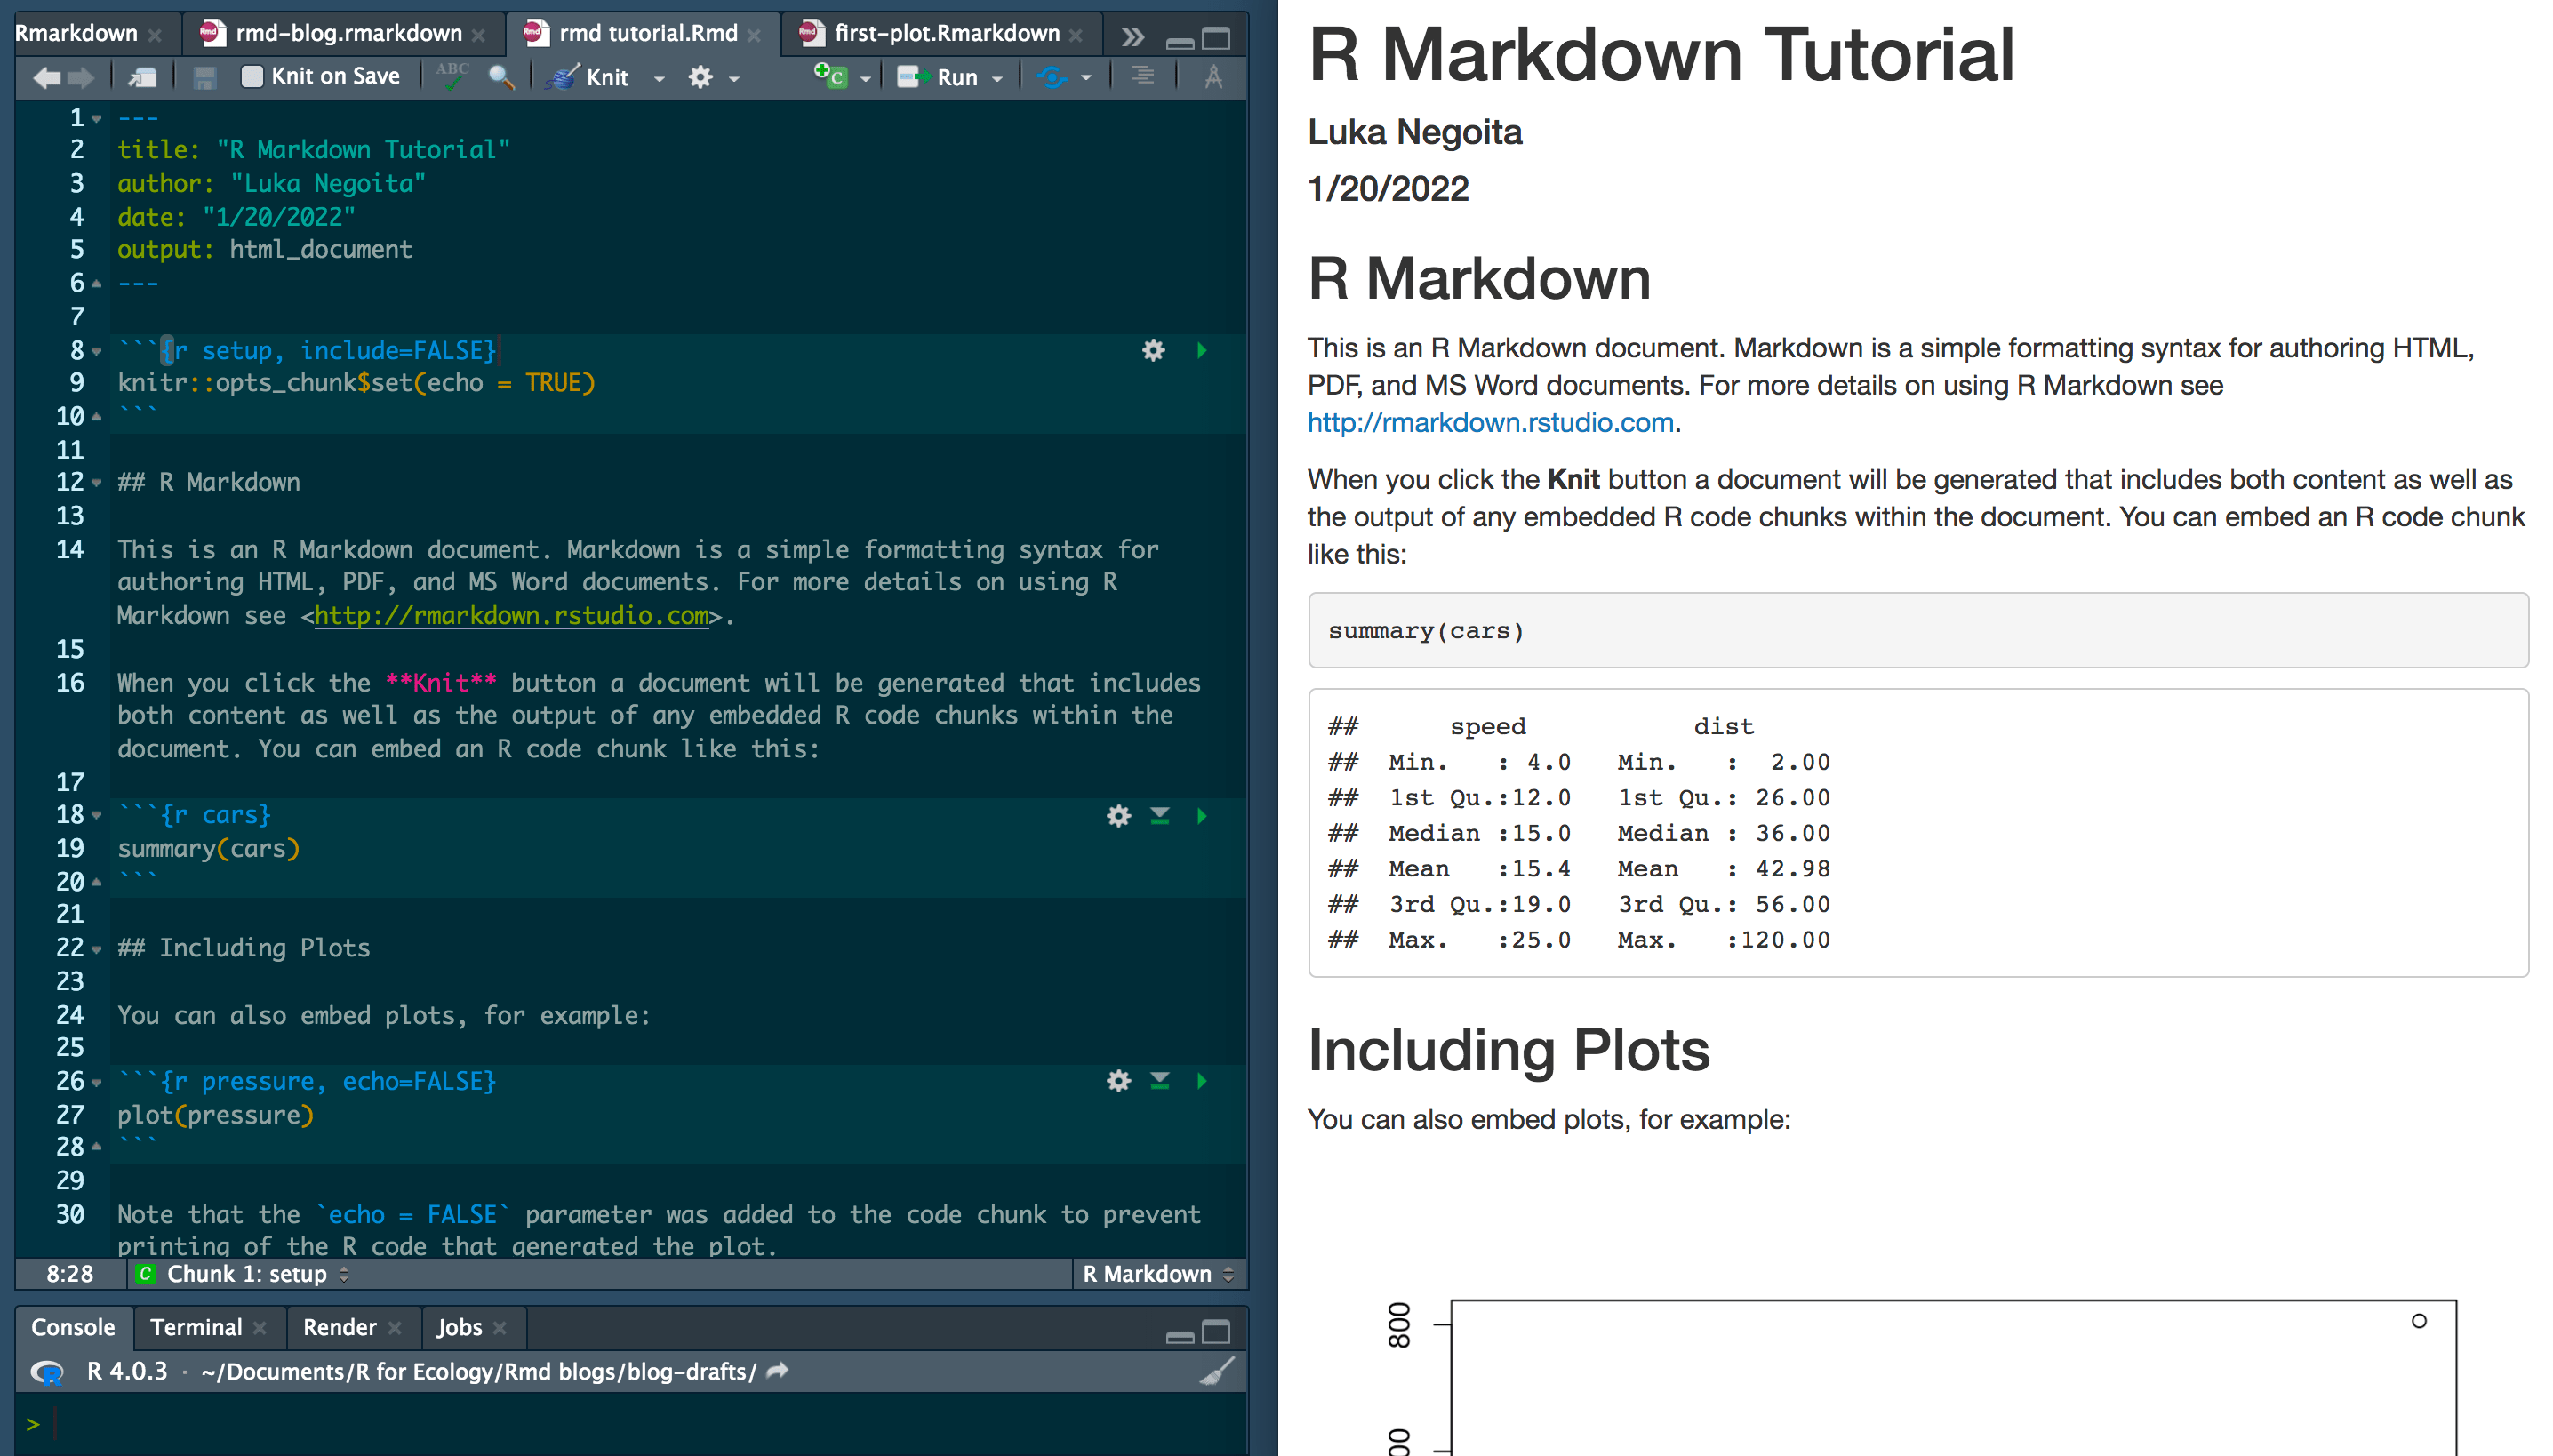 Side by side comparison of R Markdown code with the HTML output